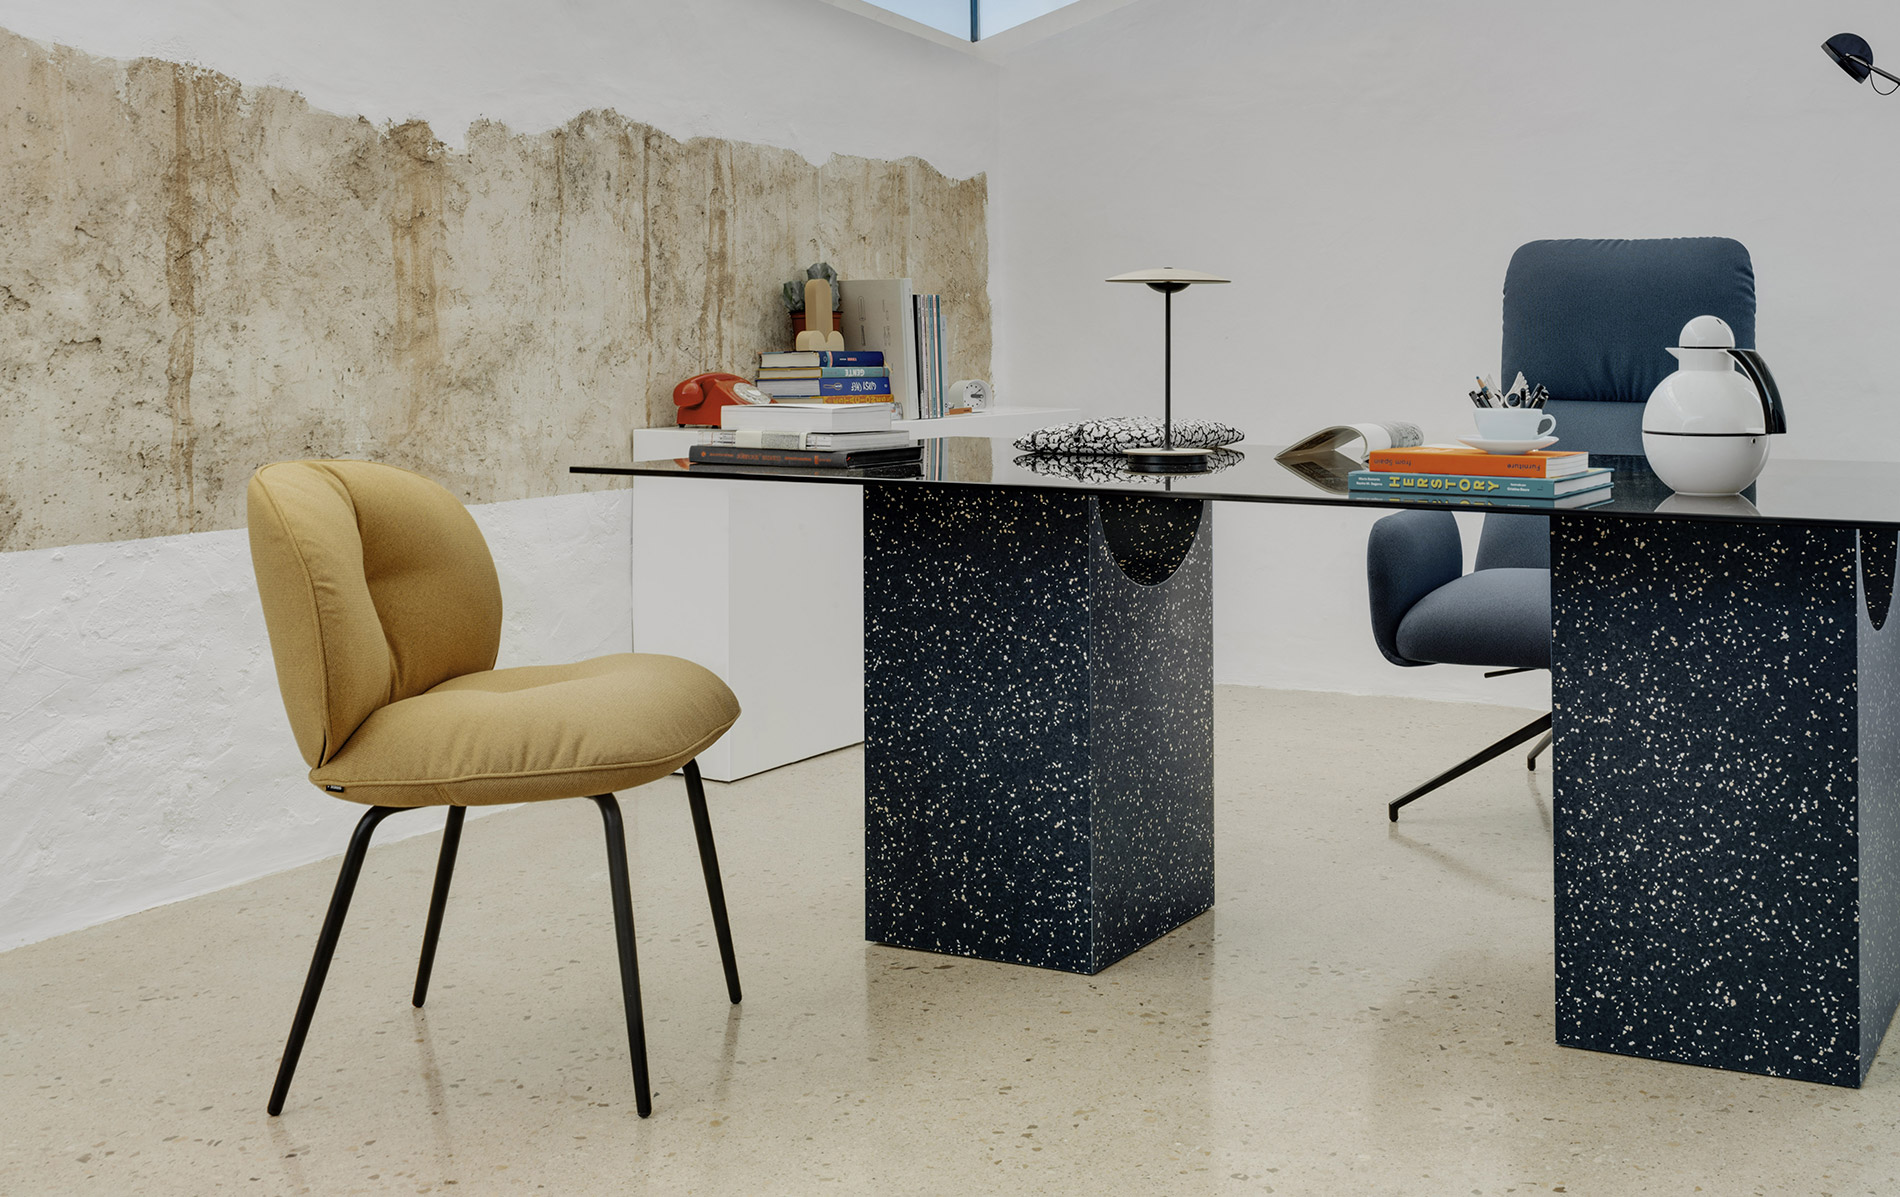 With Sancal, S is for Sustainability.